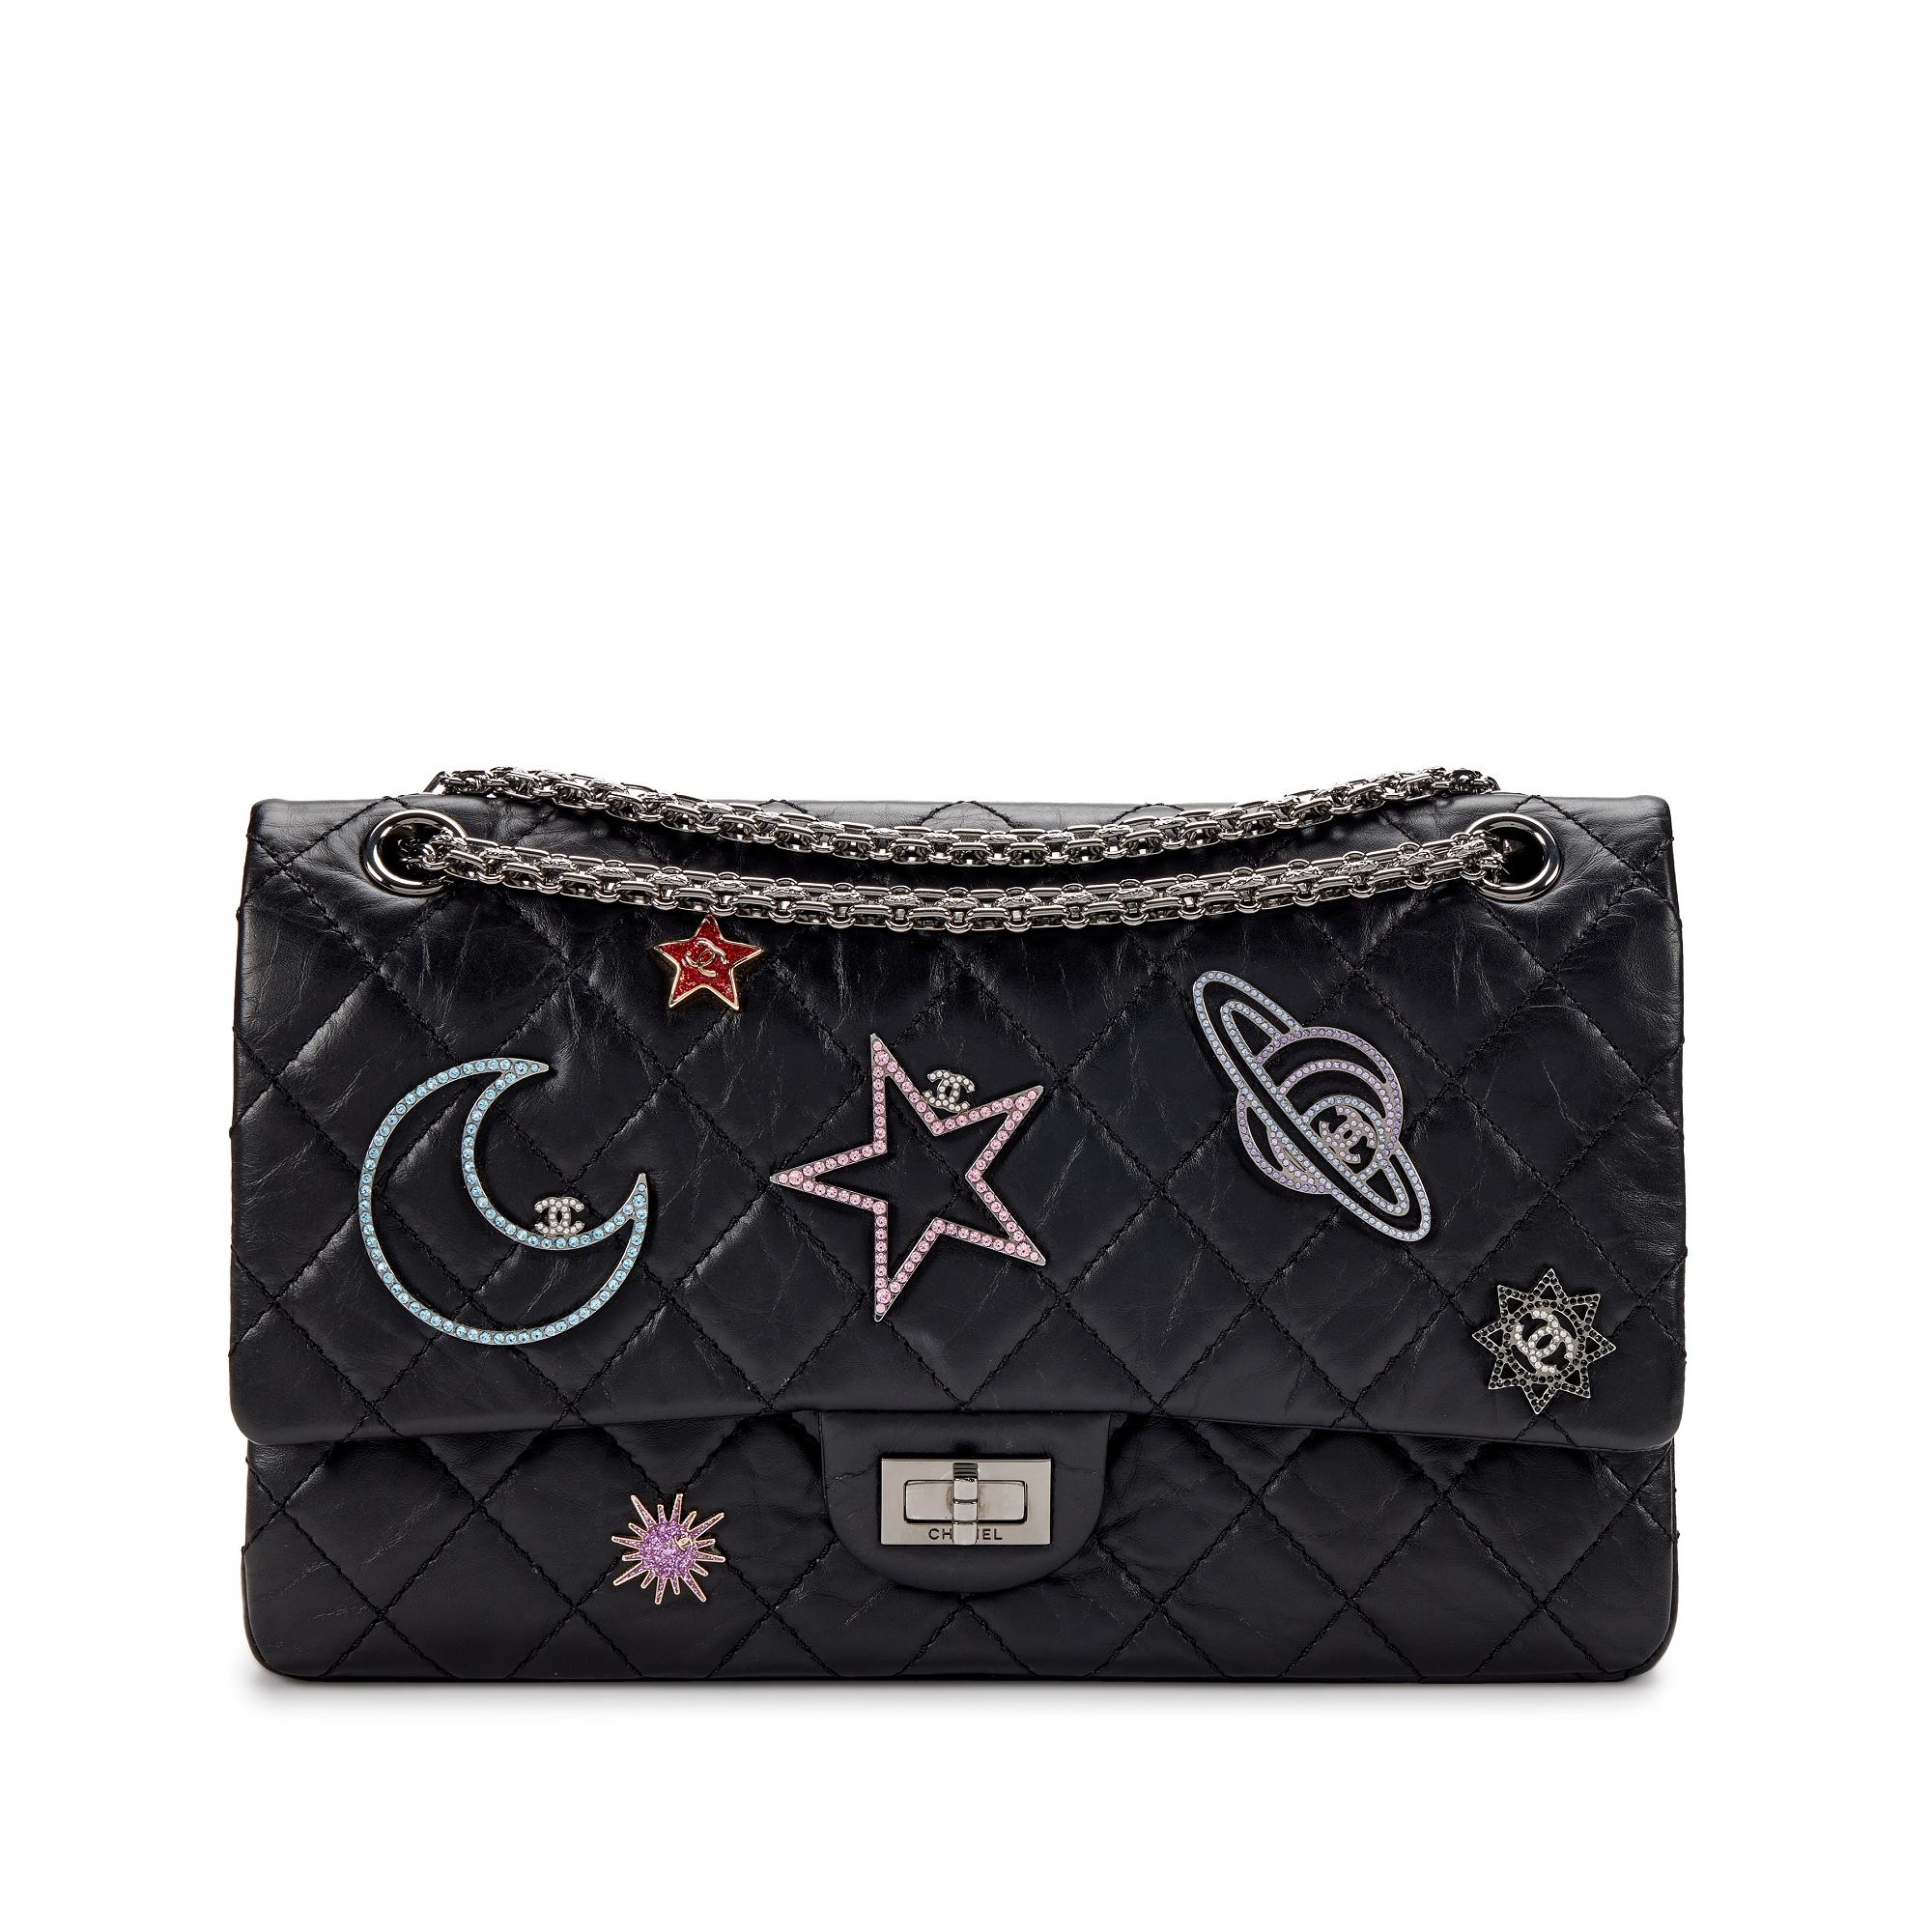 Chanel 2017 Space Reissue Charms Icons Mademoiselle Flap Bag Limited Edition For Sale 4